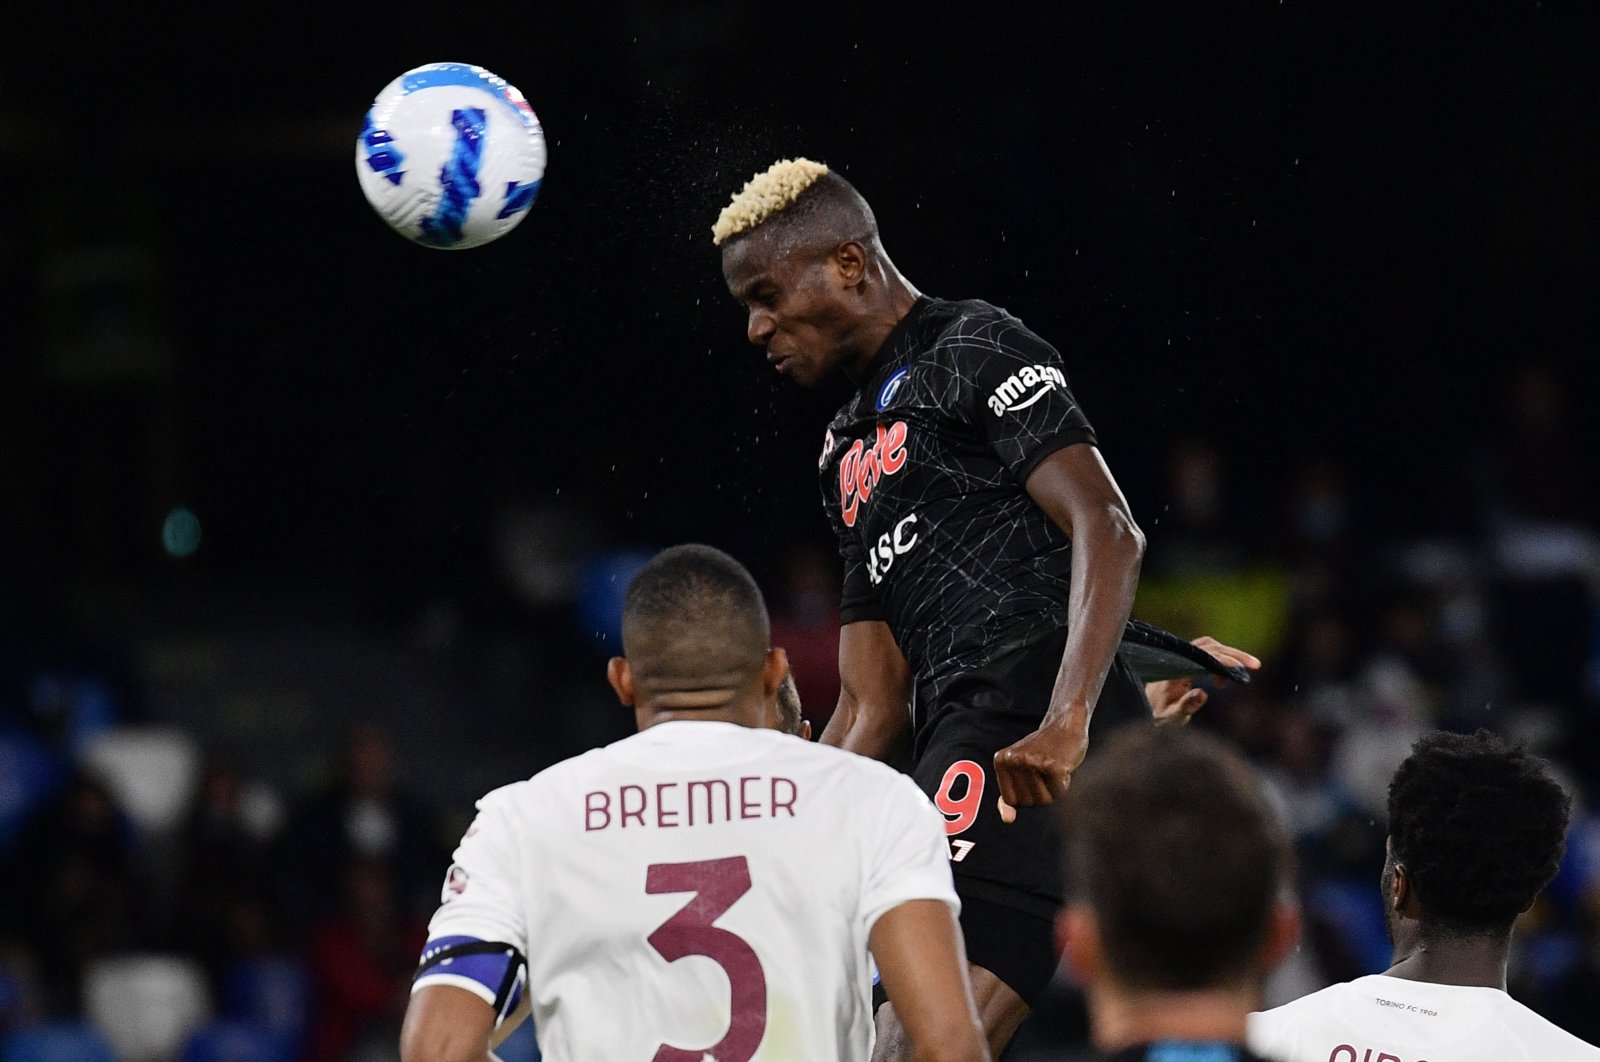 Napoli's Nigerian forward Victor Osimhen scores a header during a Serie A match against Torino at the Diego-Maradona stadium in Naples, Italy, Oct. 17, 2021. (AFP Photo)